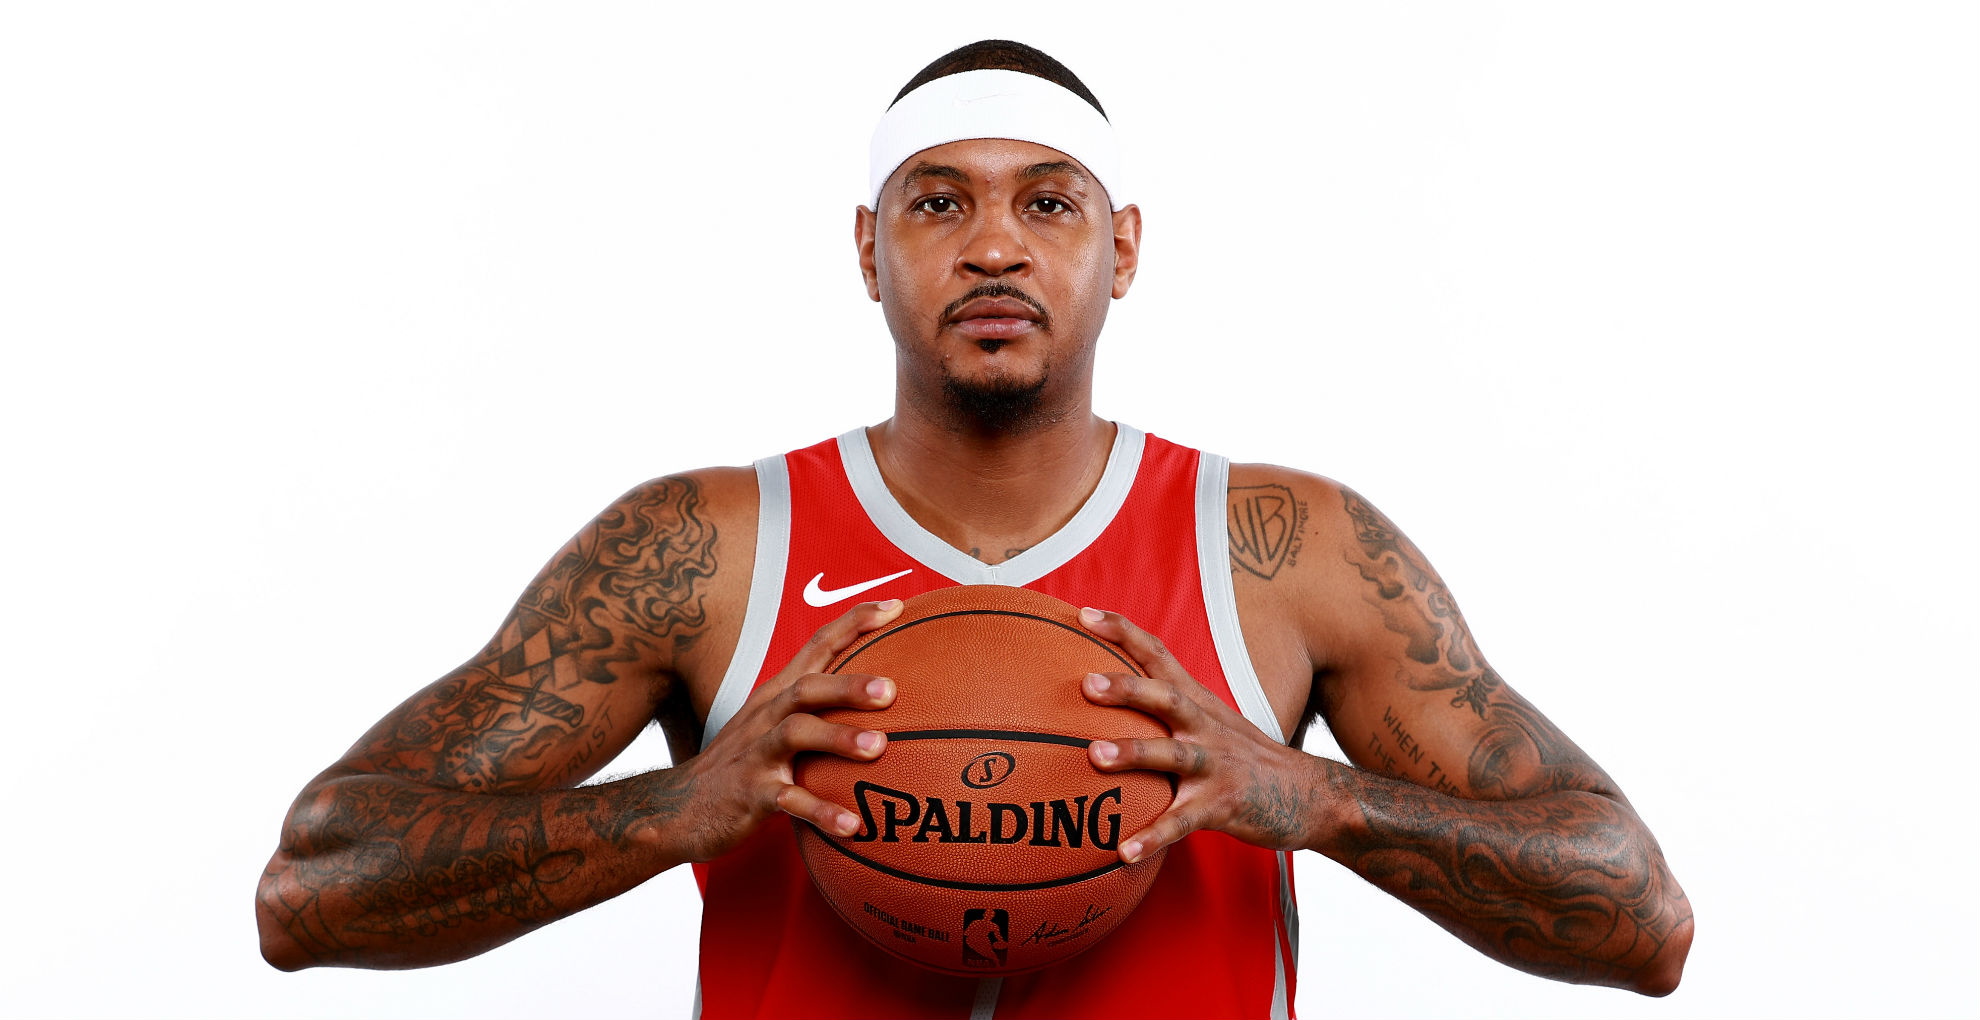 Houston Rockets forward Carmelo Anthony is ready to play his part off the bench this season.